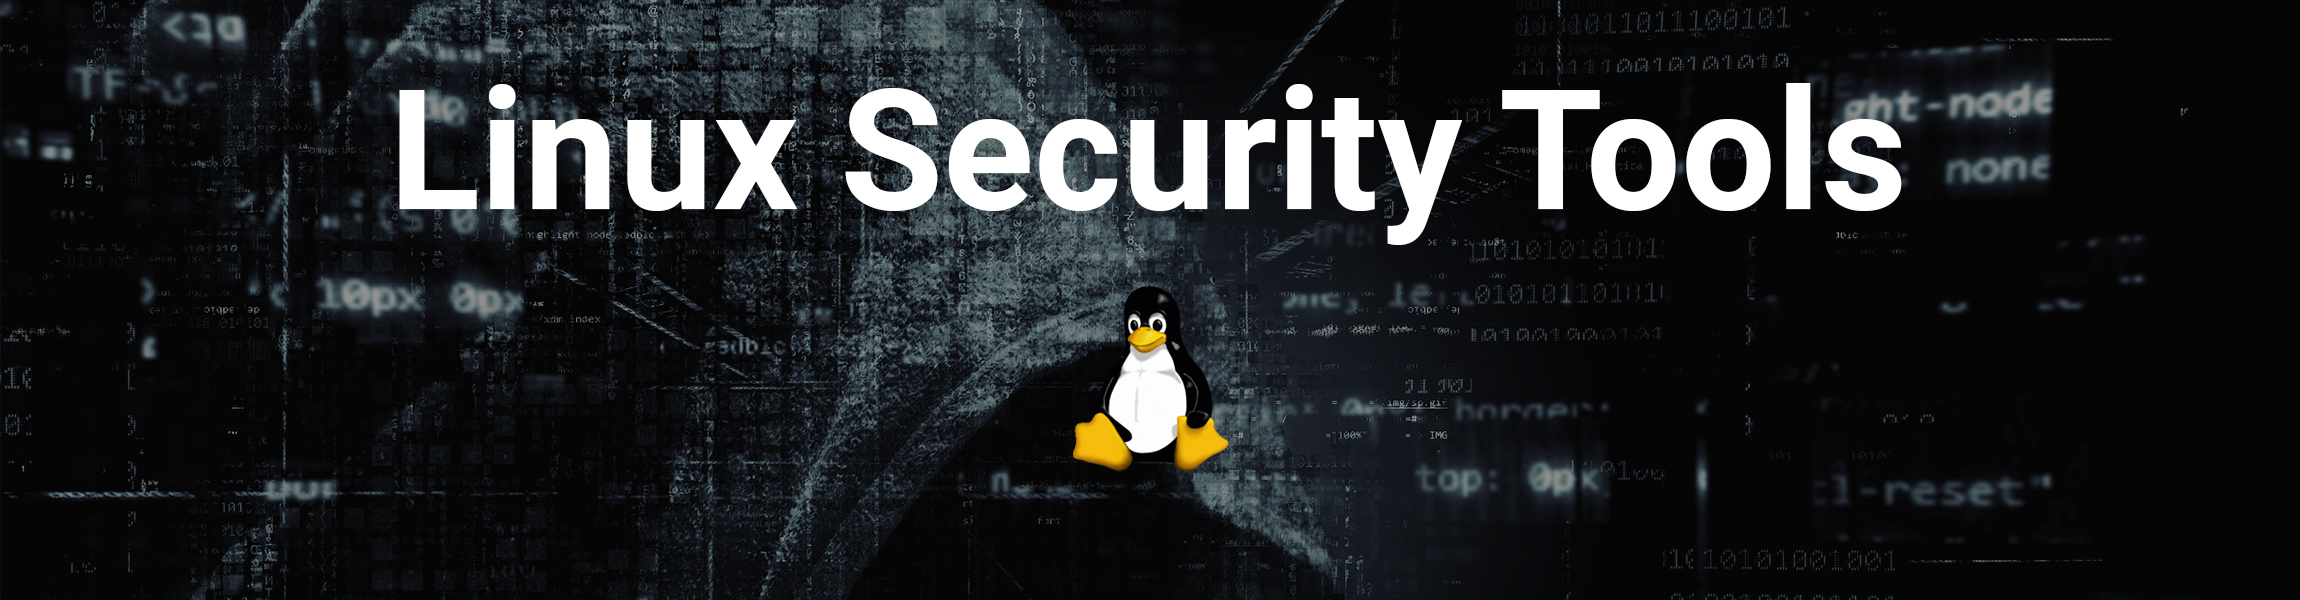 Linux Security Tools